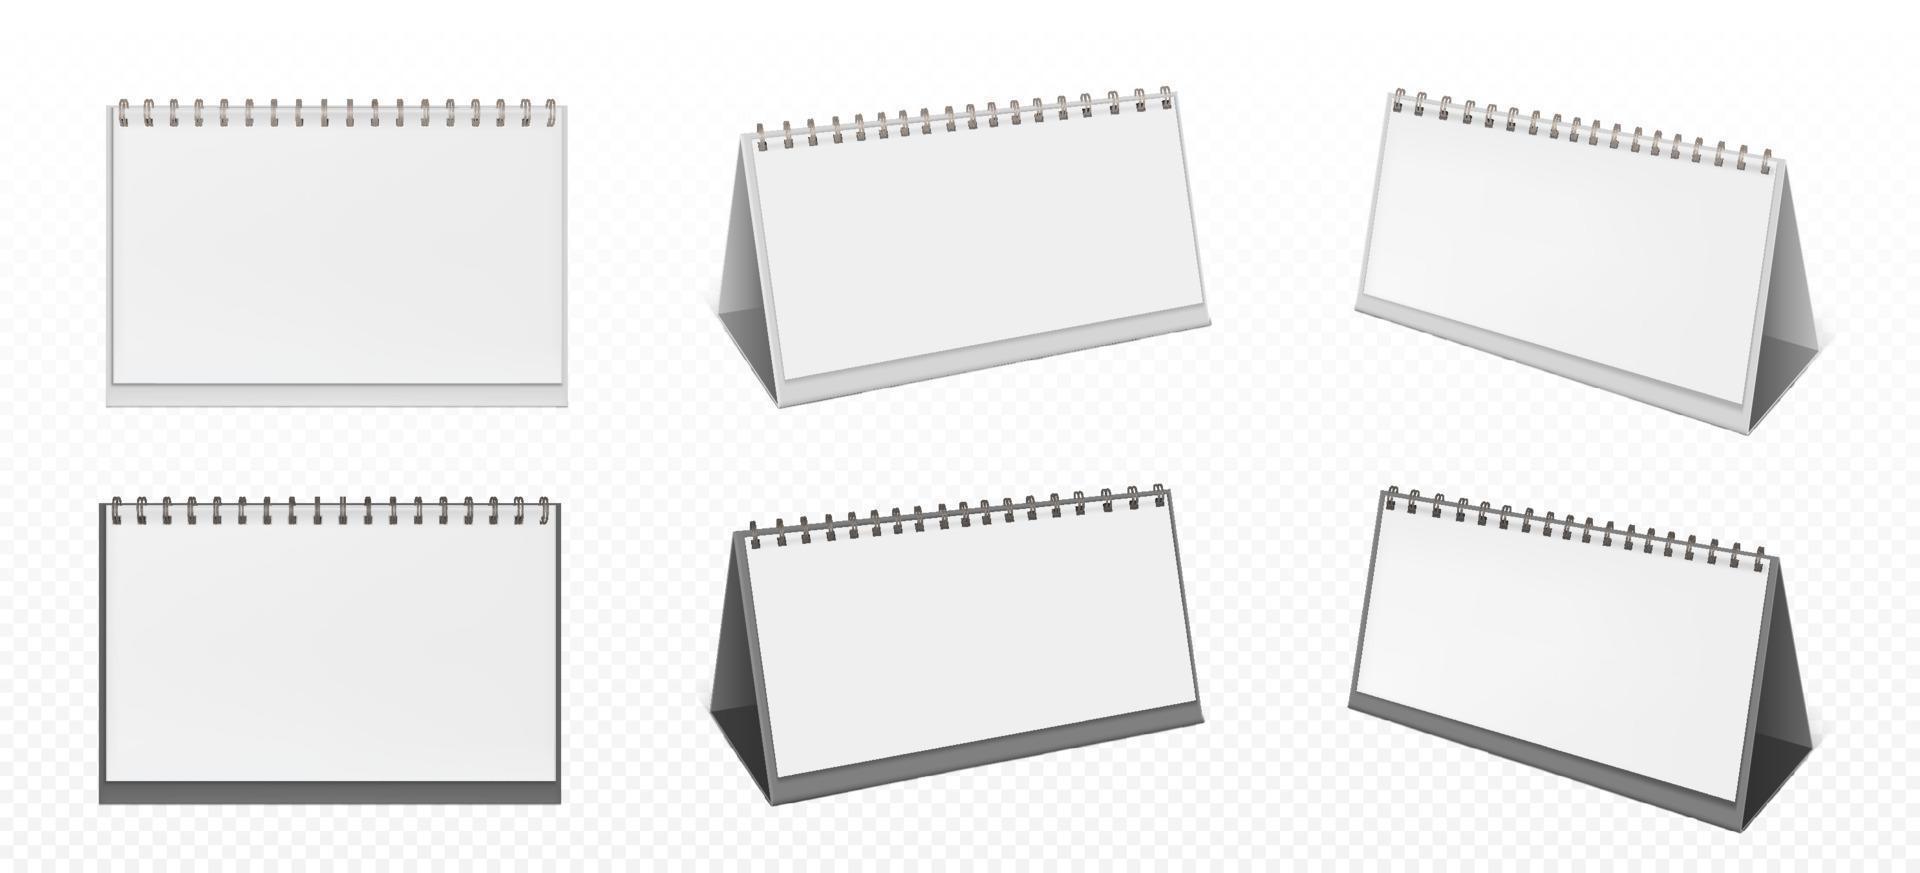 Desktop calendar with spiral and blank pages vector